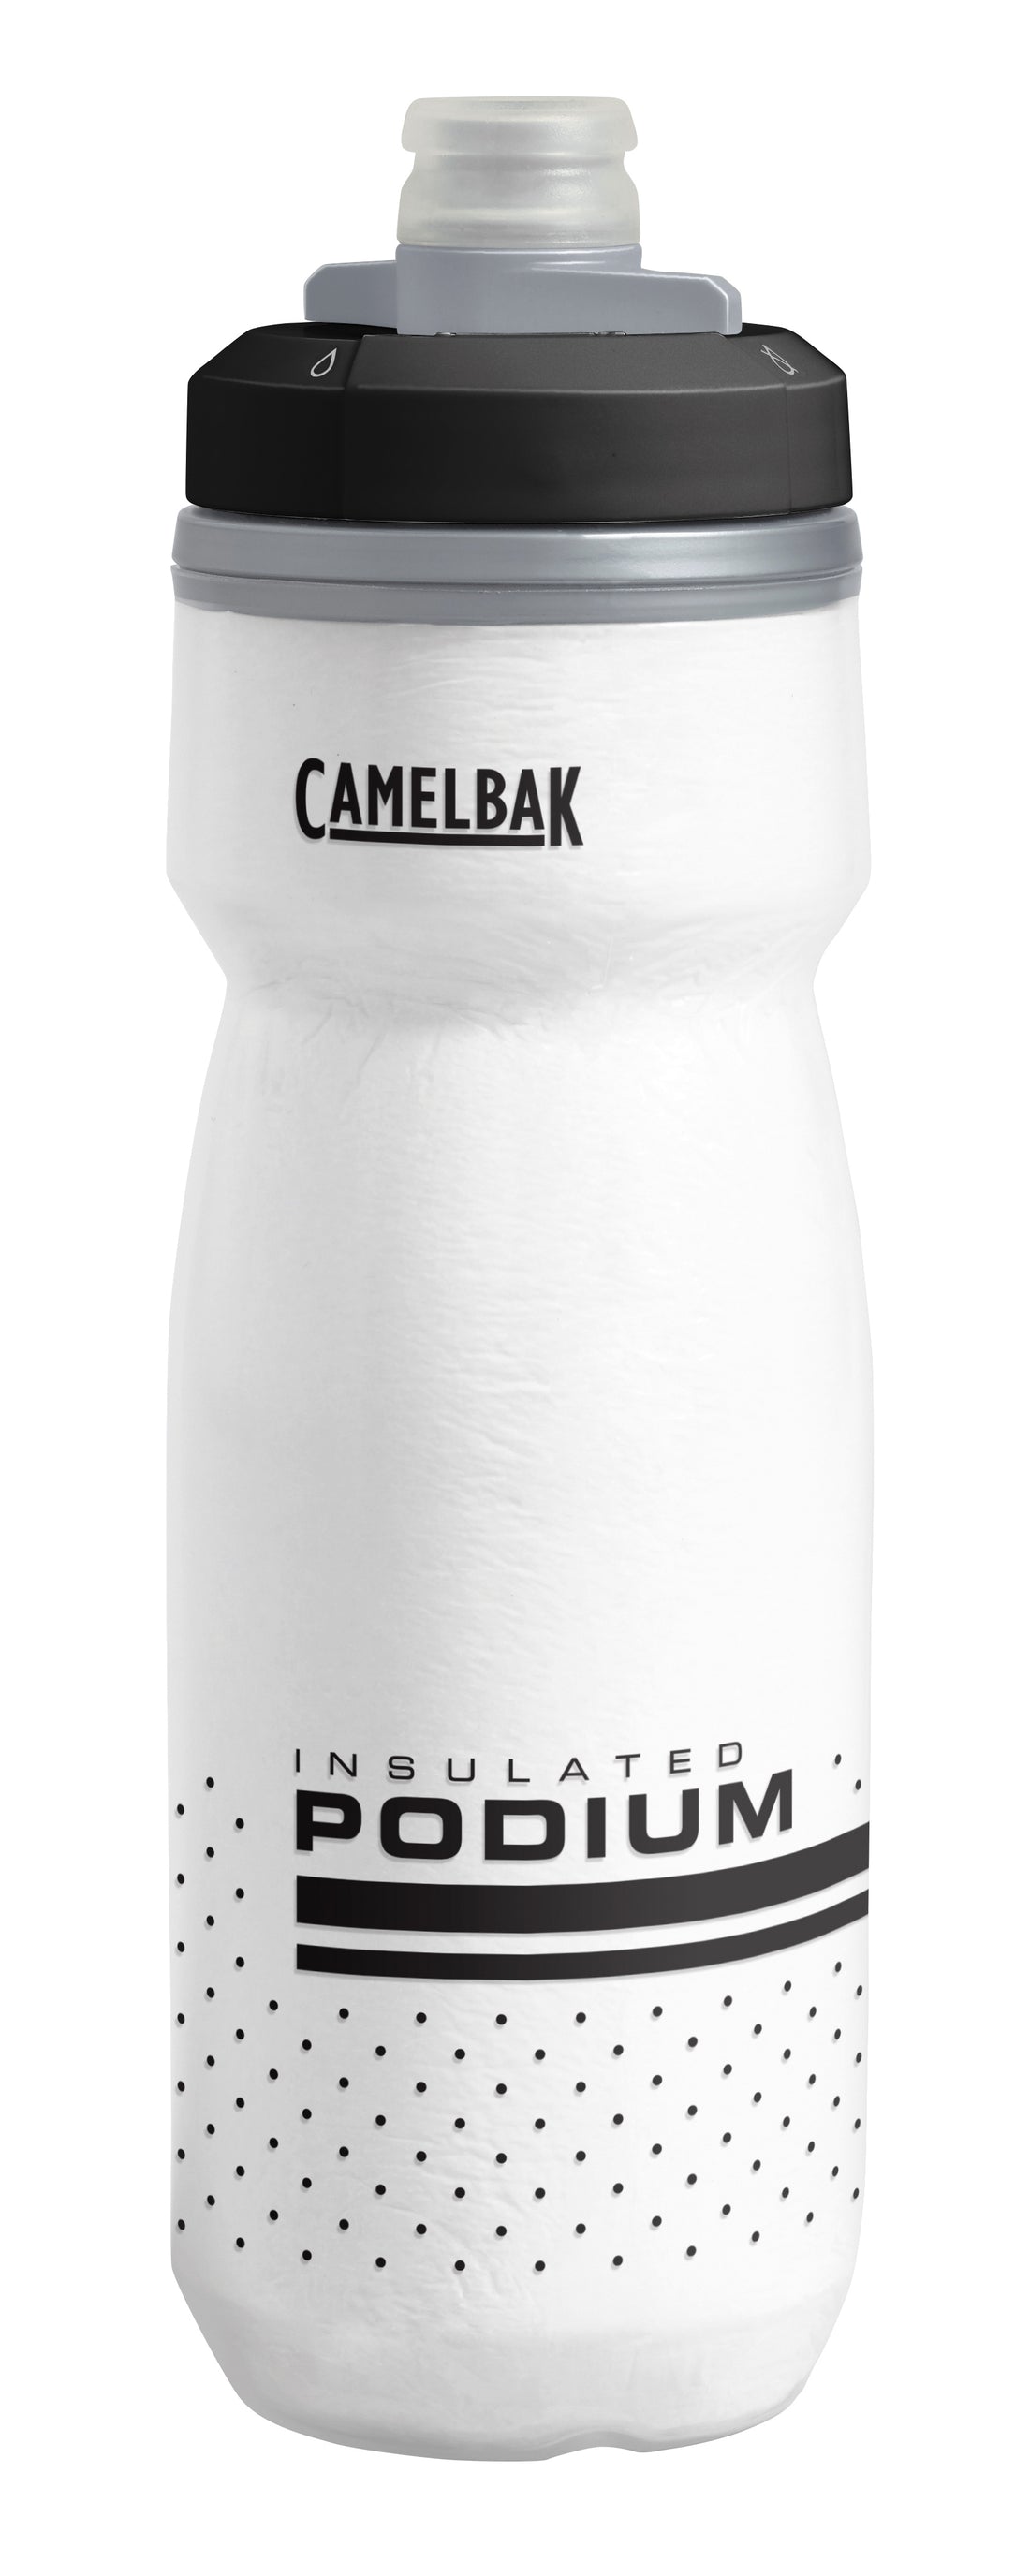 Camelbak|PODIUM®_CHILL™|Cycle_LM